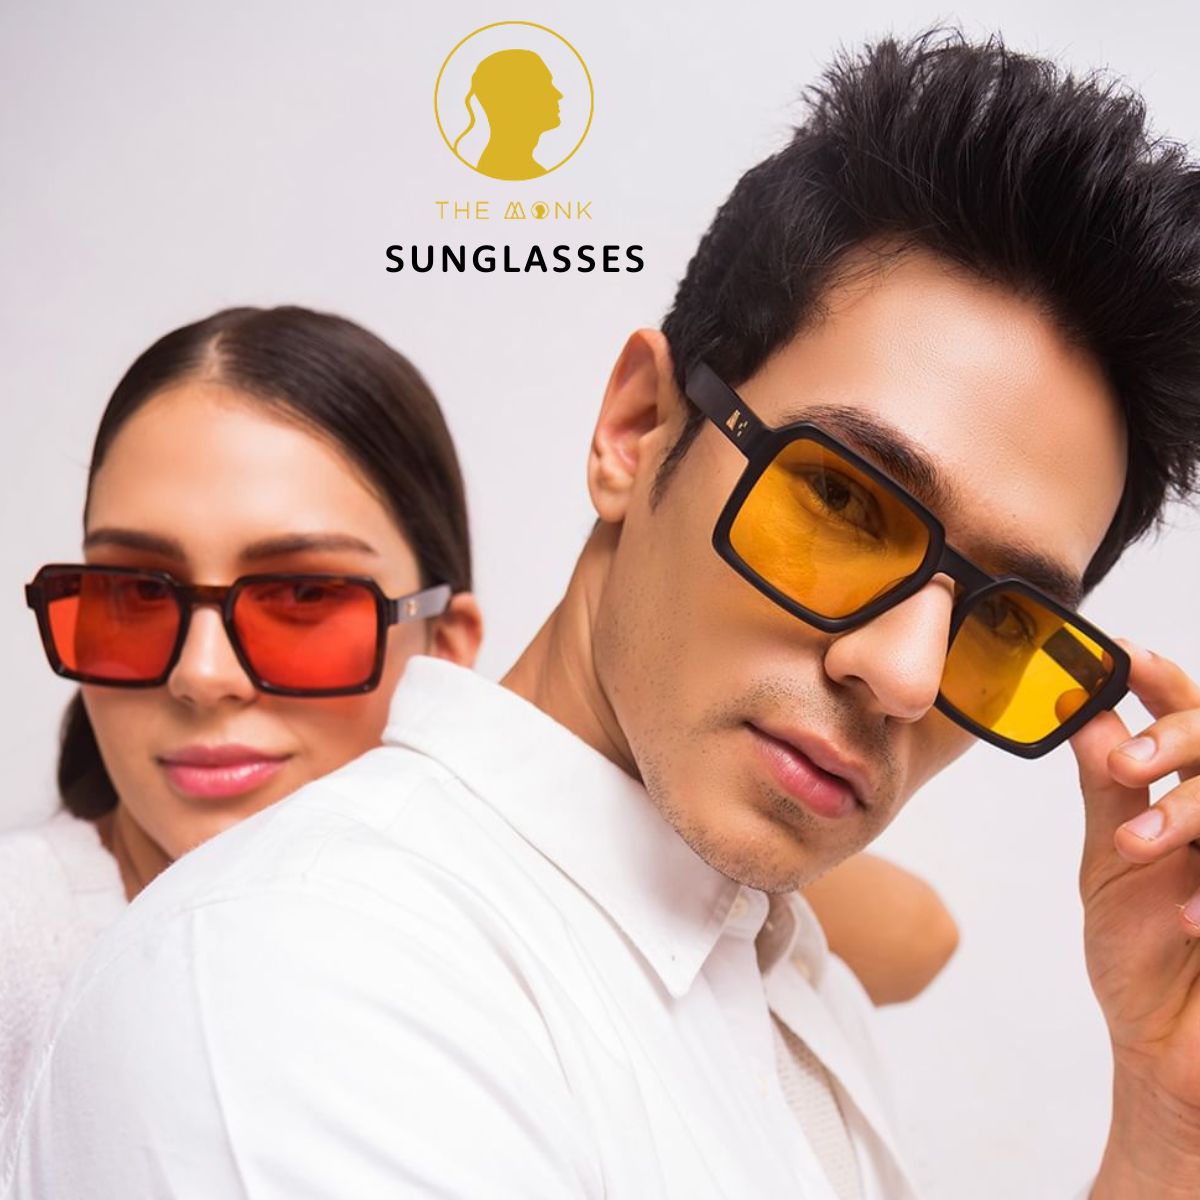 "Explore a wide selection of stylish The Monk Sunglasses at Optorium, perfect for men and women looking for sun protection with ultimate style."